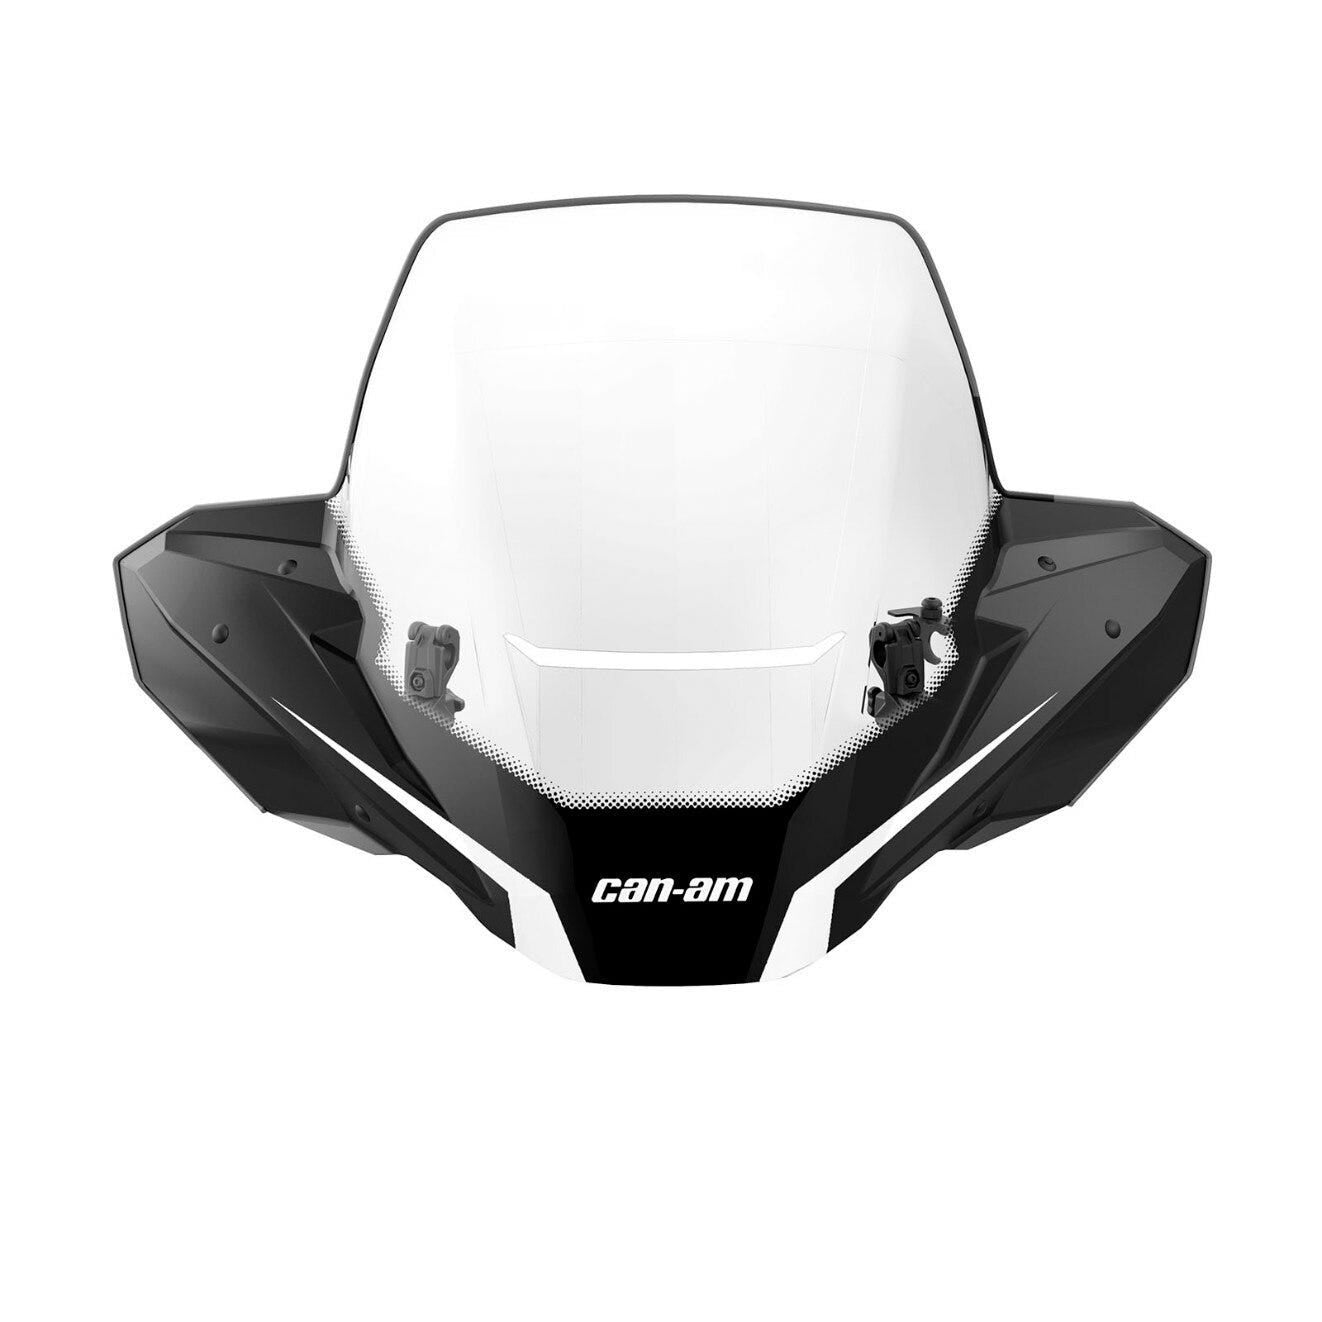 Can-am Low Windshield Kit 715003021 - The Parts Lodge